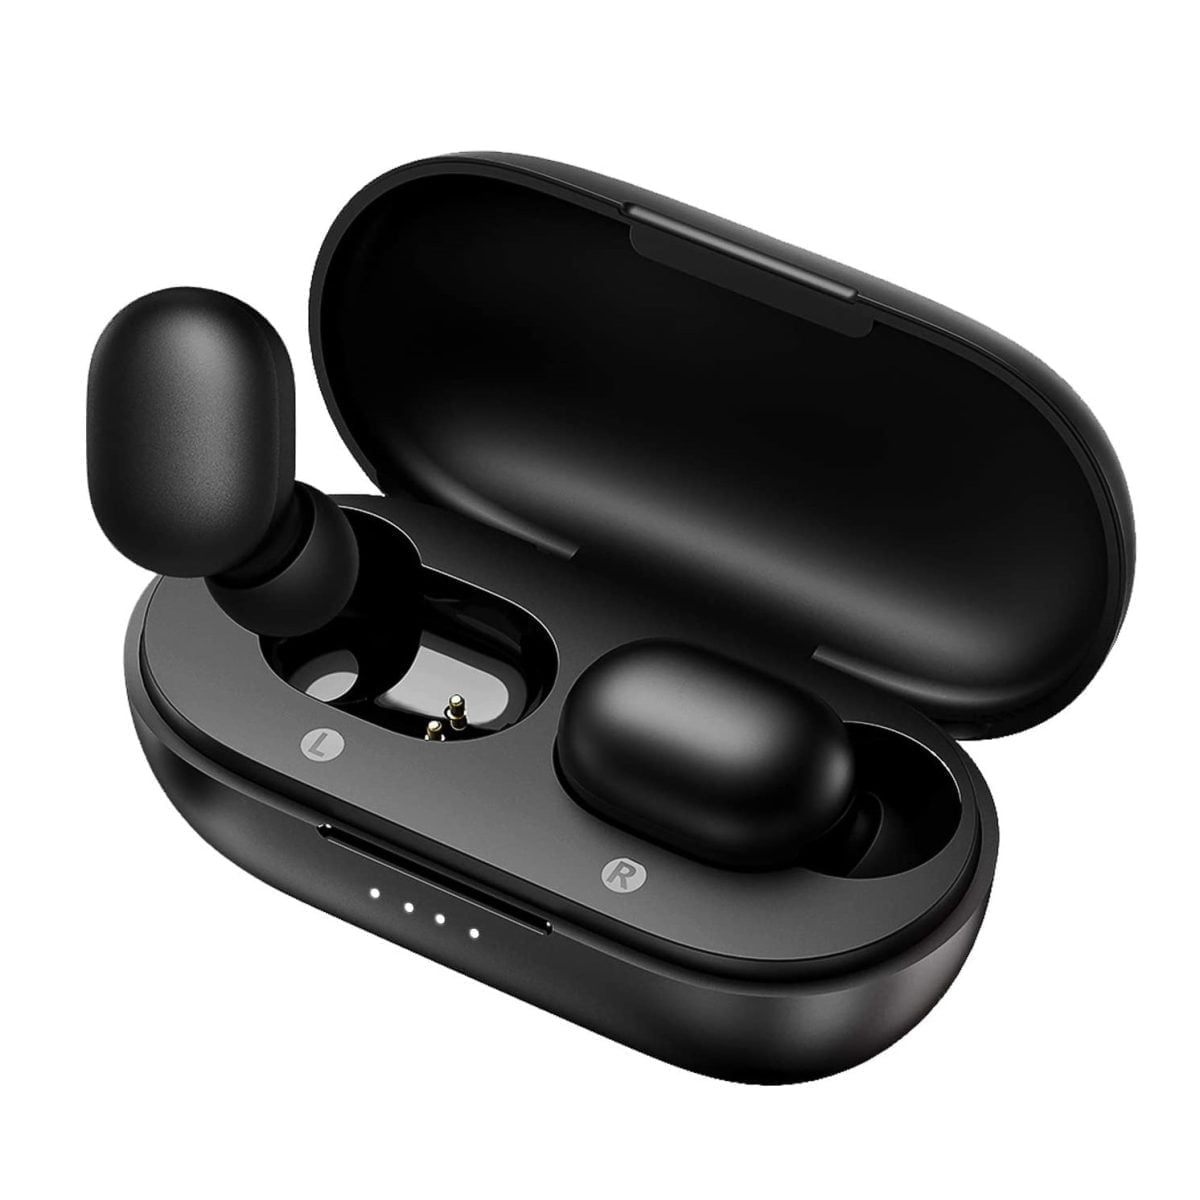 61Qizg440Tl. Ac Sl1500 Haylou &Lt;H1 Class=&Quot;Gt1-Xr-S1-Header&Quot;&Gt;Haylou Gt1 Xr Tws Bluetooth Earbuds&Lt;/H1&Gt; Haylou Gt1 Xr - Is The Latest Tws Bluetooth 5.0 Earbuds From Haylou. The Sales Start On July 30, 2020. The Earbuds Are Built On A High-Quality Qualcomm Qcc3020 Chipset, With Bluetooth 5.0 Supports, And Provides Sound Transmission Using Aptx Technology And Work With The Aac Codec. A 7.2Mm Woollen Bio-Diaphragm Ensures High-Quality Reproduction In The Entire Sound Range. Earbuds Haylou Gt1 Xr Will Appeal Not Only To Lovers Of Quality Music But Also To Gamers Because These Earbuds Guarantee Sound Transmission With A Near-Zero Delay If Your Device Supports Bluetooth 5.0. The Weight Of Each Earbud Is Only 3.9 Grams. Earbuds Haylou Gt1 Xr Can Work Up To 5 Hours On A Single Charge, And The Use Of A Charging Box Increases Battery Life Up To 36 Hours. These Earbuds Are Controlled By Touch Panels. Bluetooth Earbuds Haylou Gt1 Xr Bluetooth Earbuds